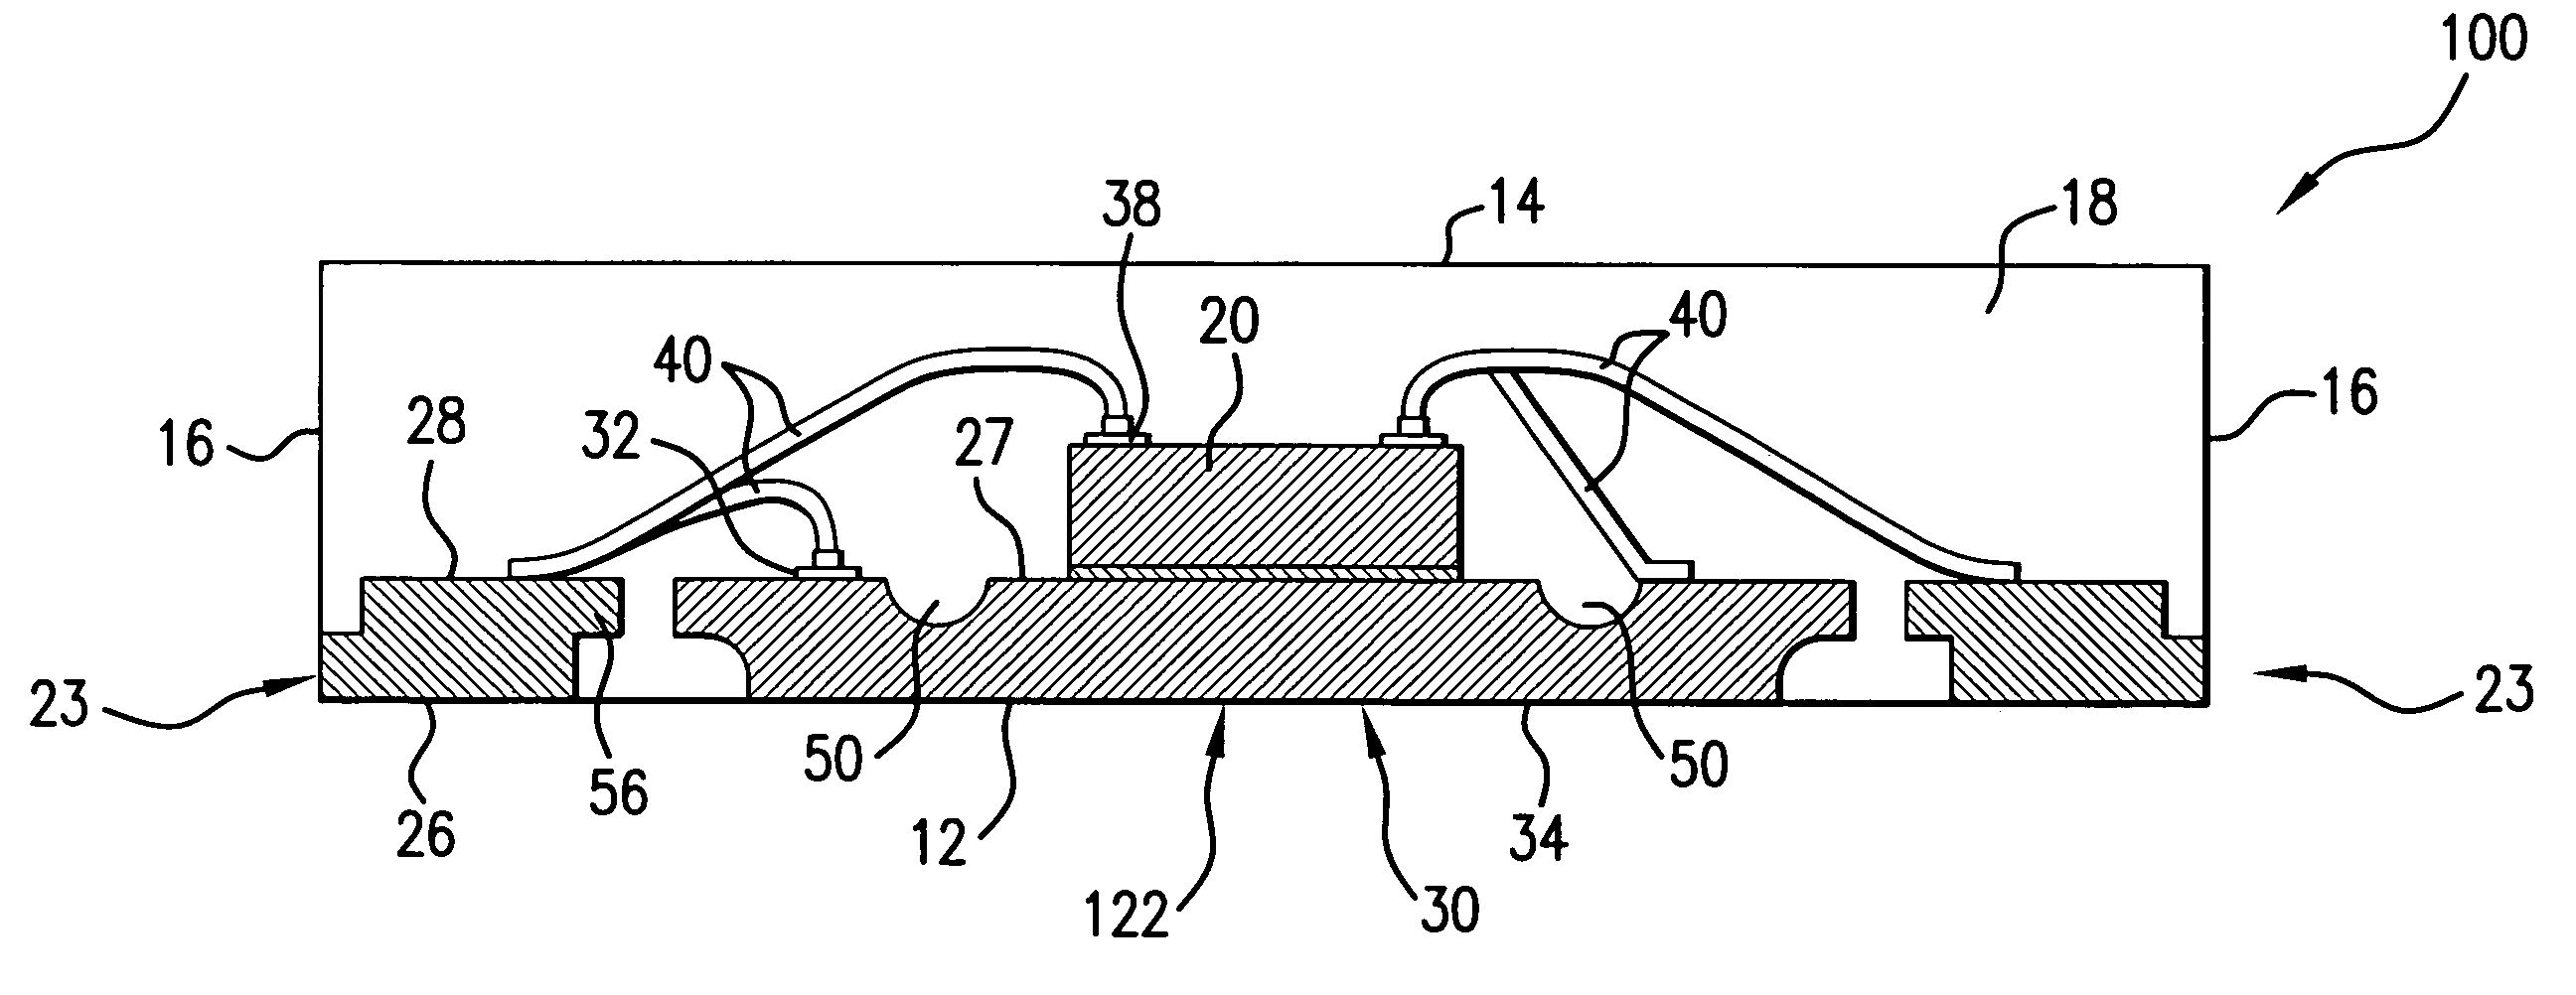 Die pad for semiconductor packages and methods of making and using same